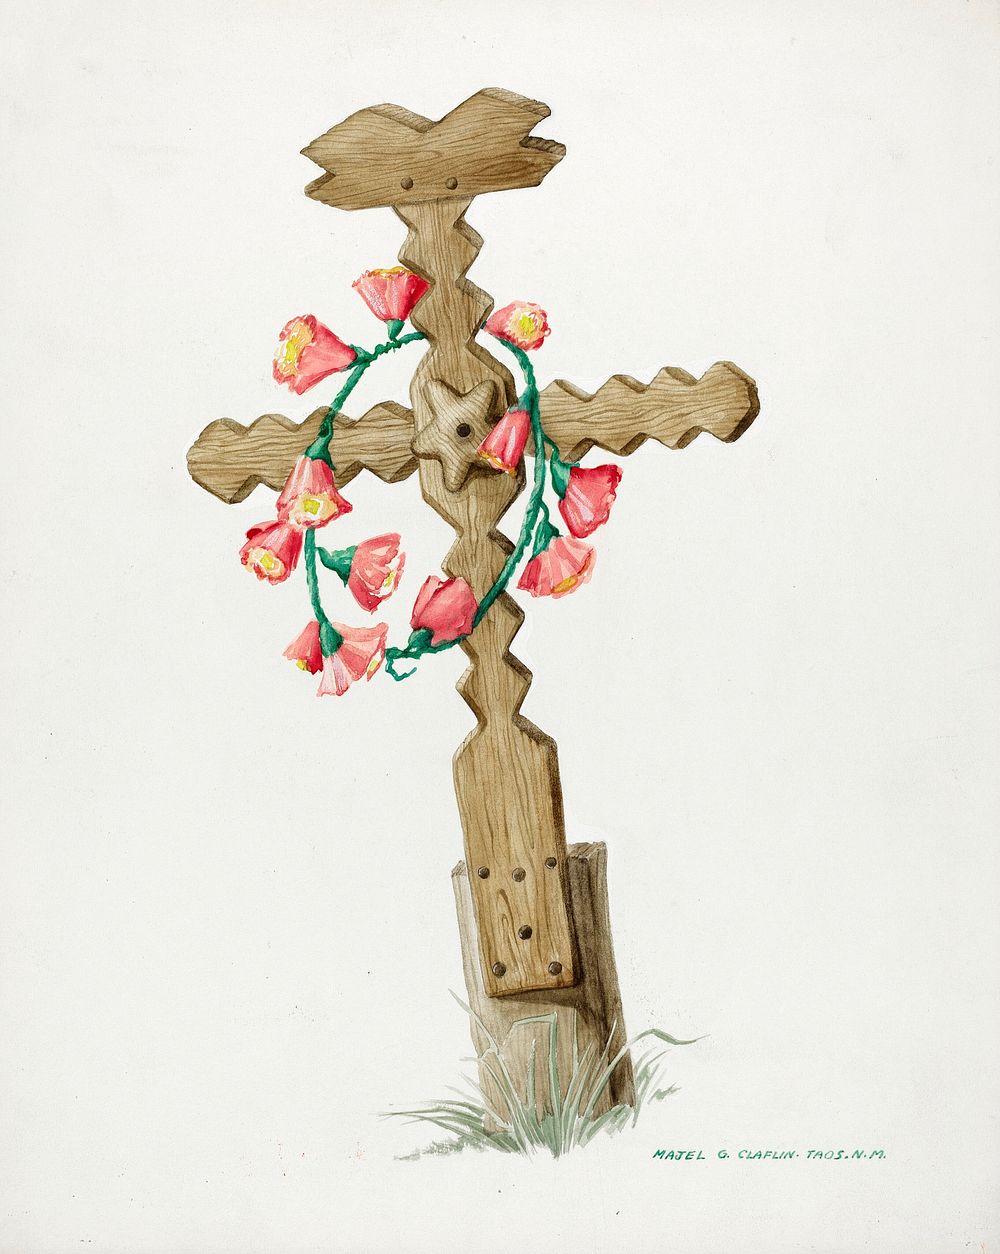 Wooden Cross used as Headstone (ca.1937) by Majel G. Claflin. Original from The National Gallery of Art. Digitally enhanced…